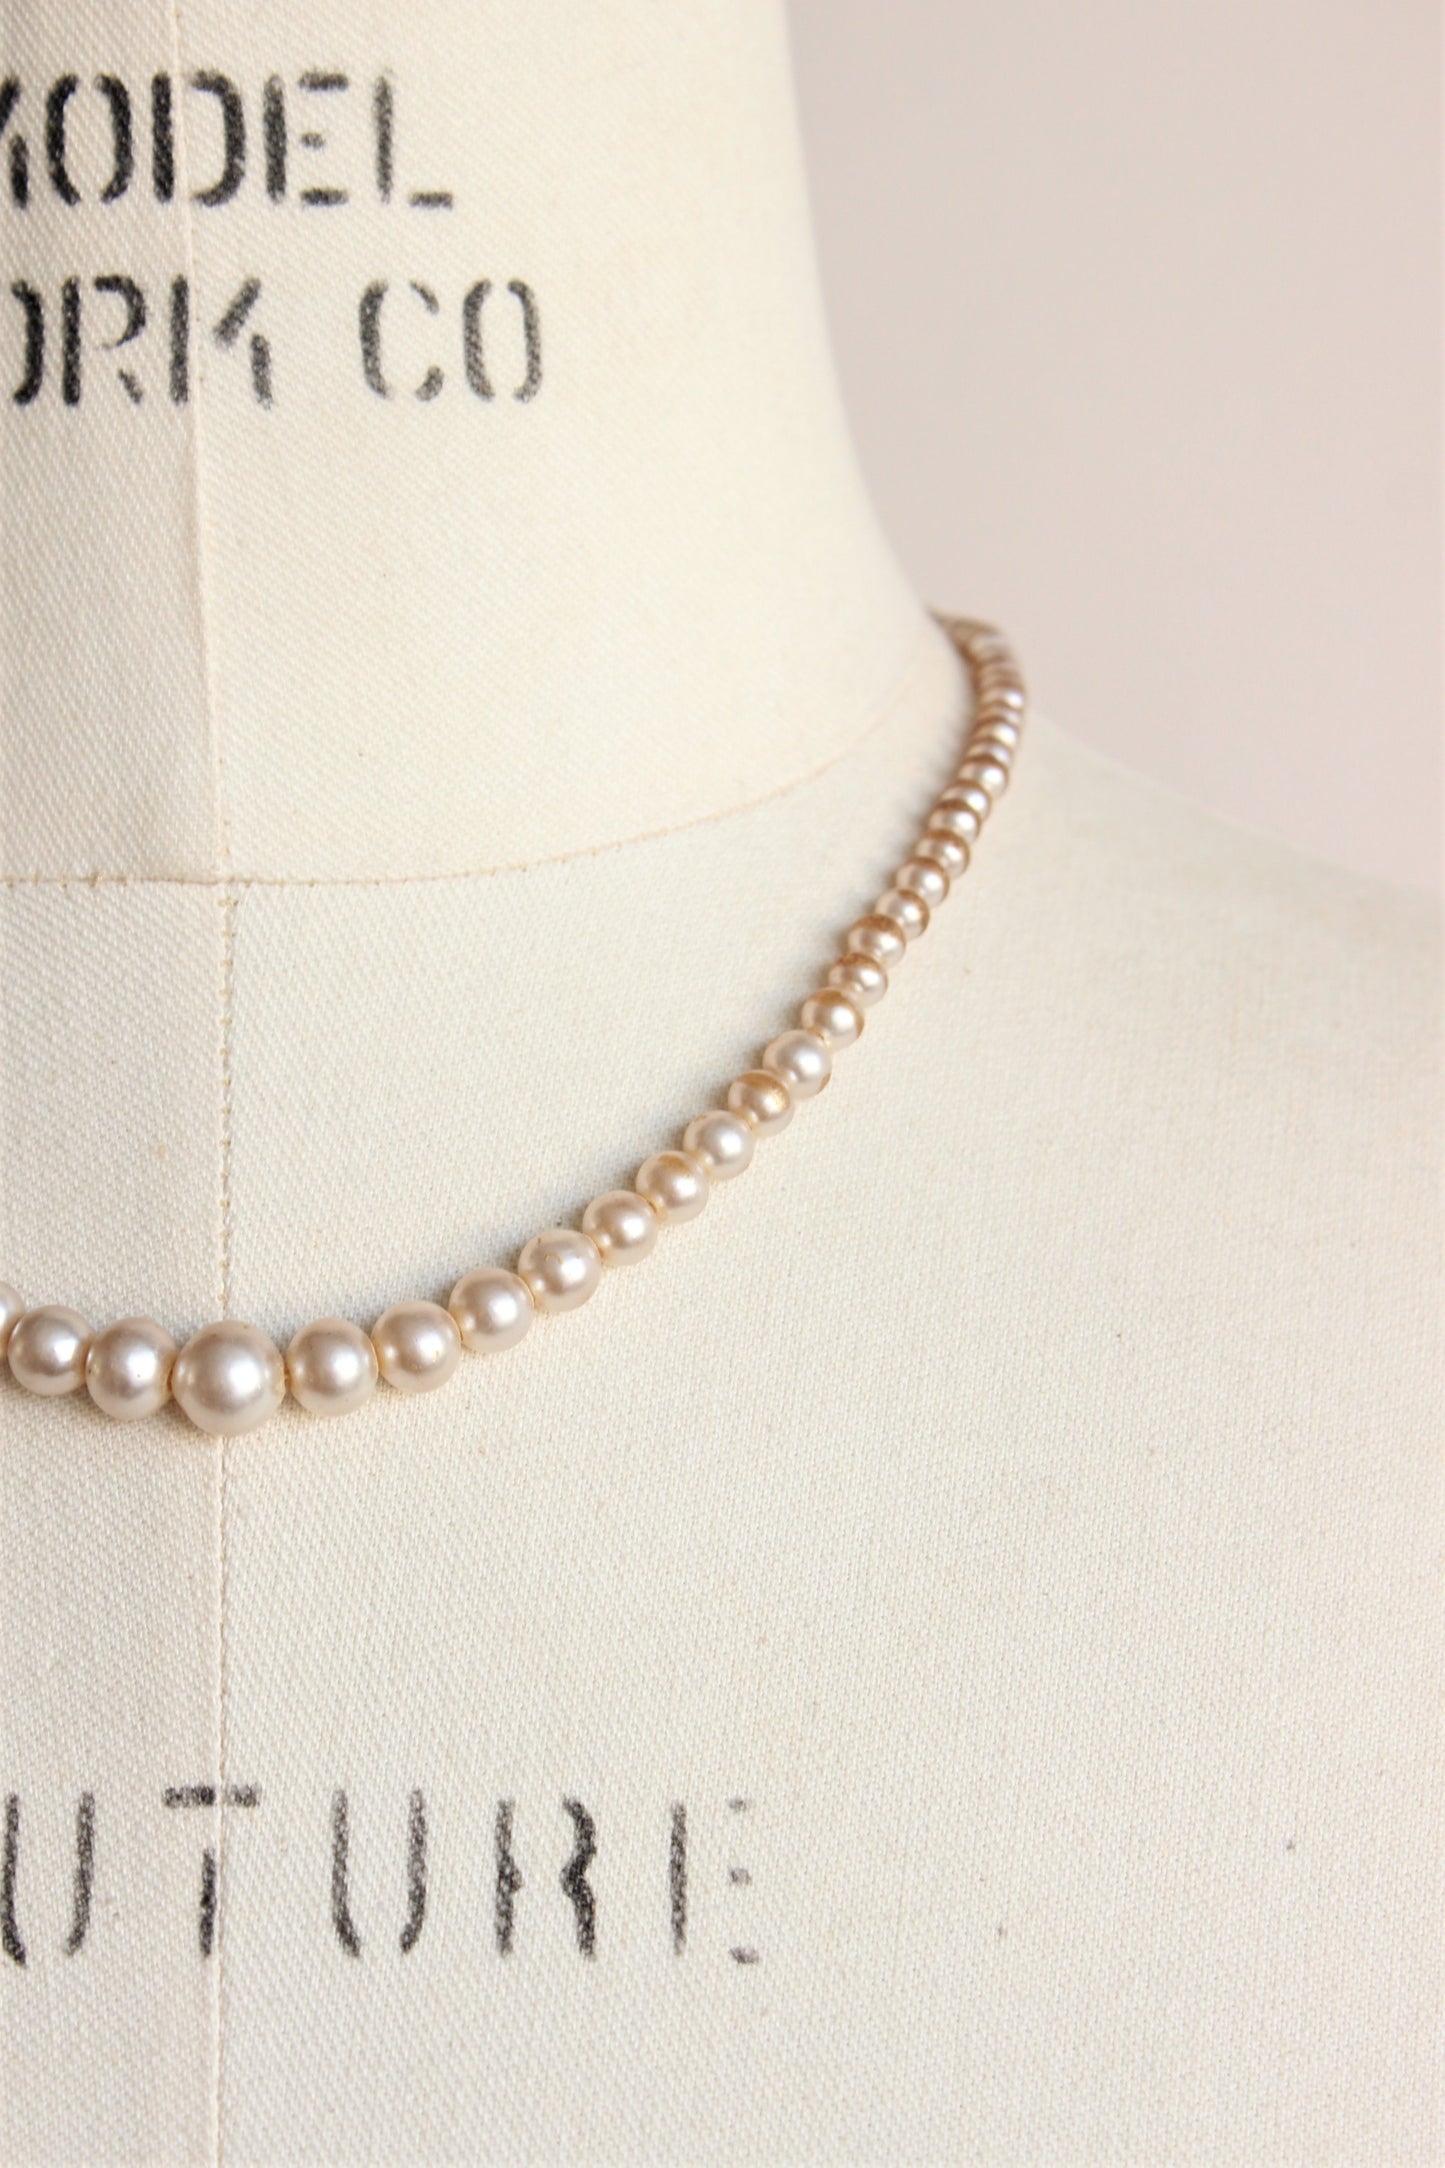 Vintage 1950s 1960s Faux Pearl Choker Necklace 16 Inch From Japan